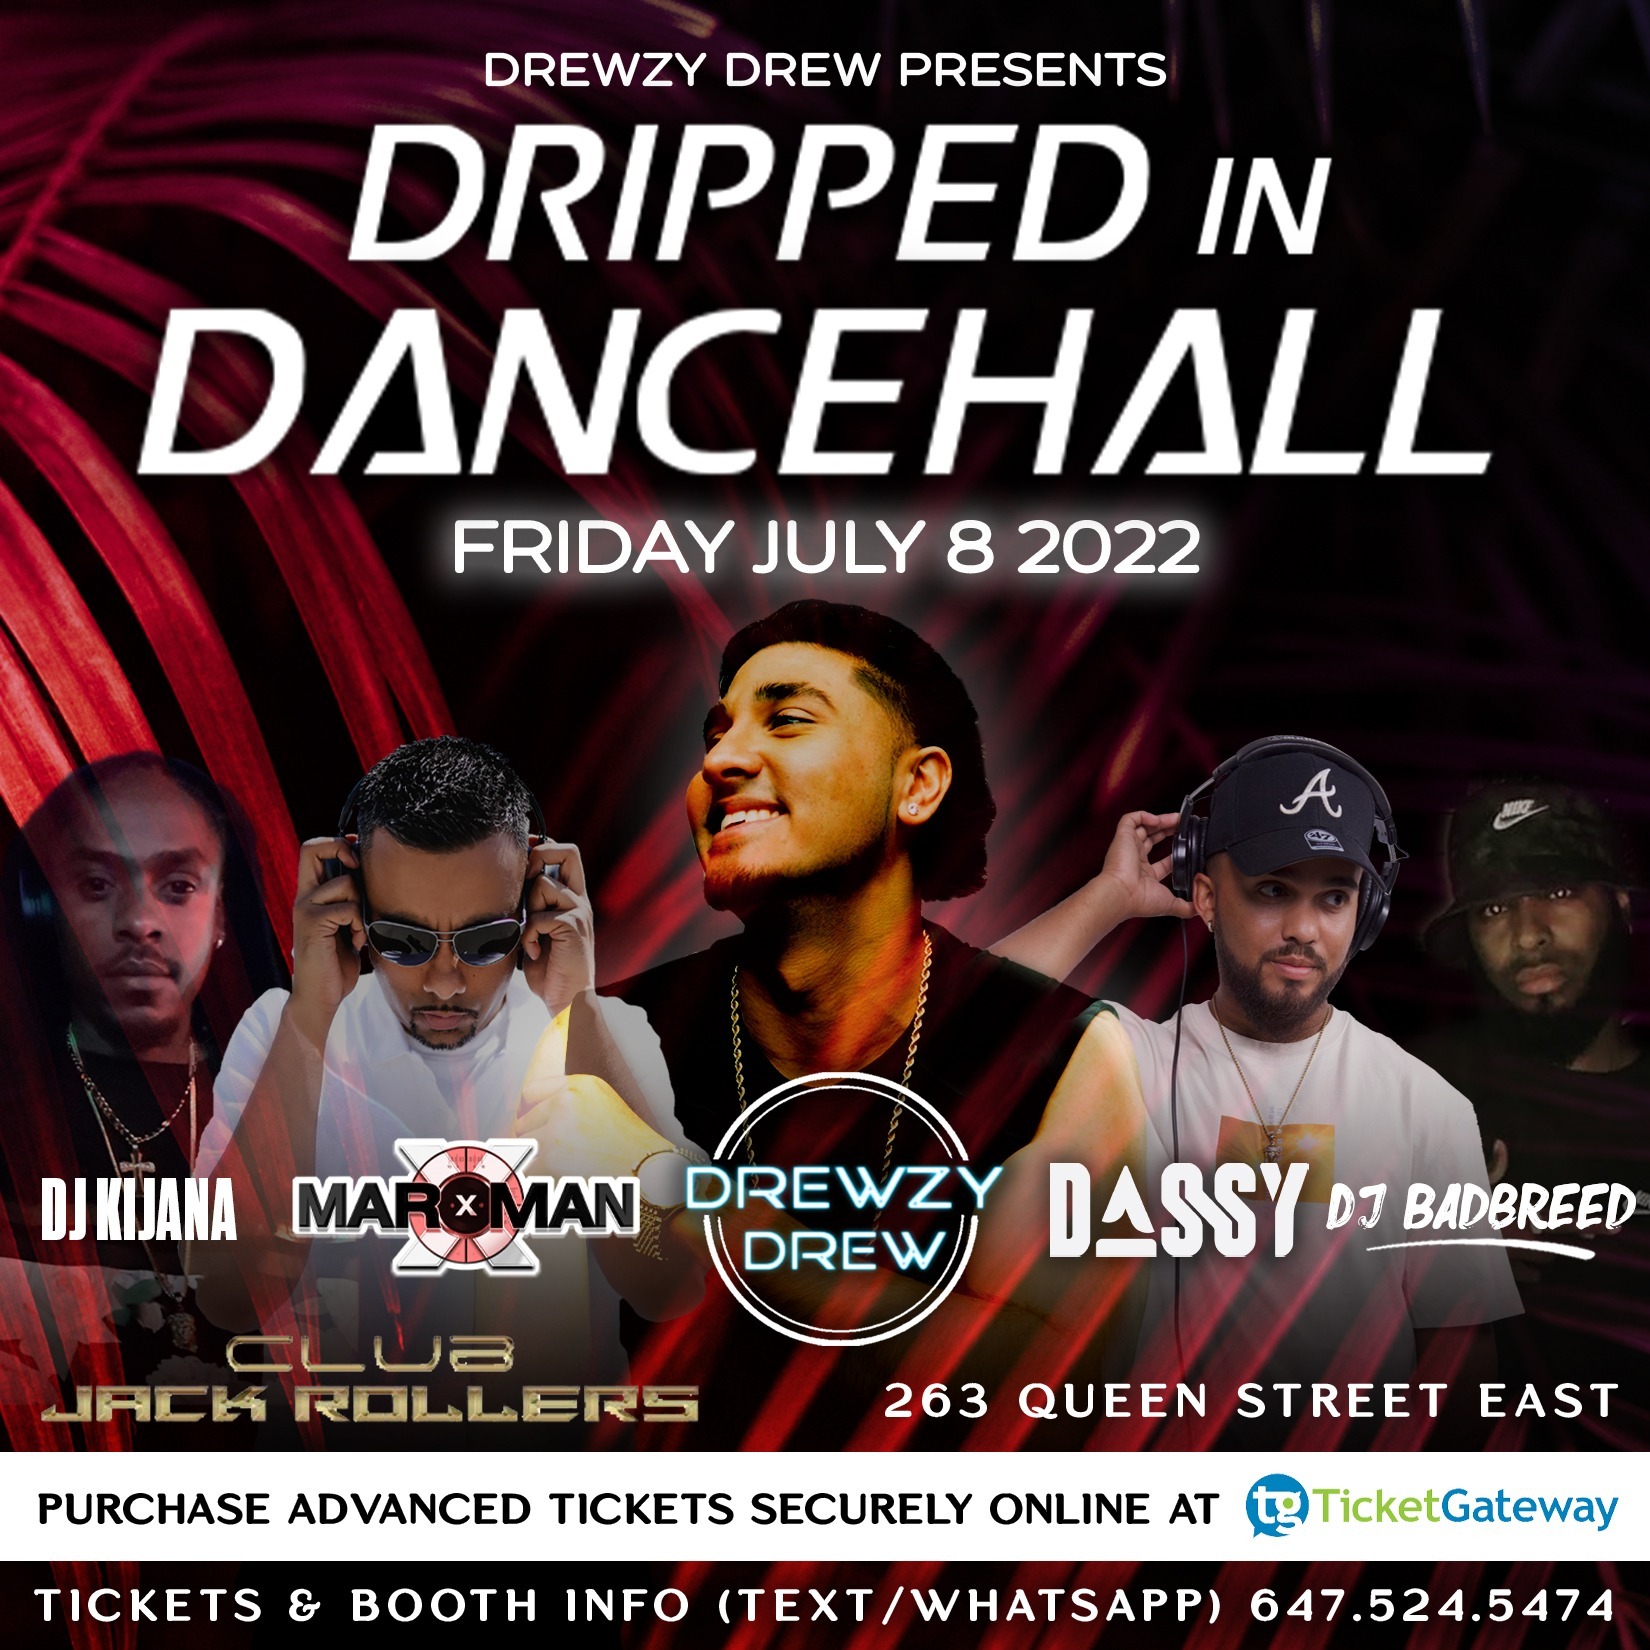 DRIPPED IN DANCEHALL (DID) PRESENTED BY DREWZY DREW